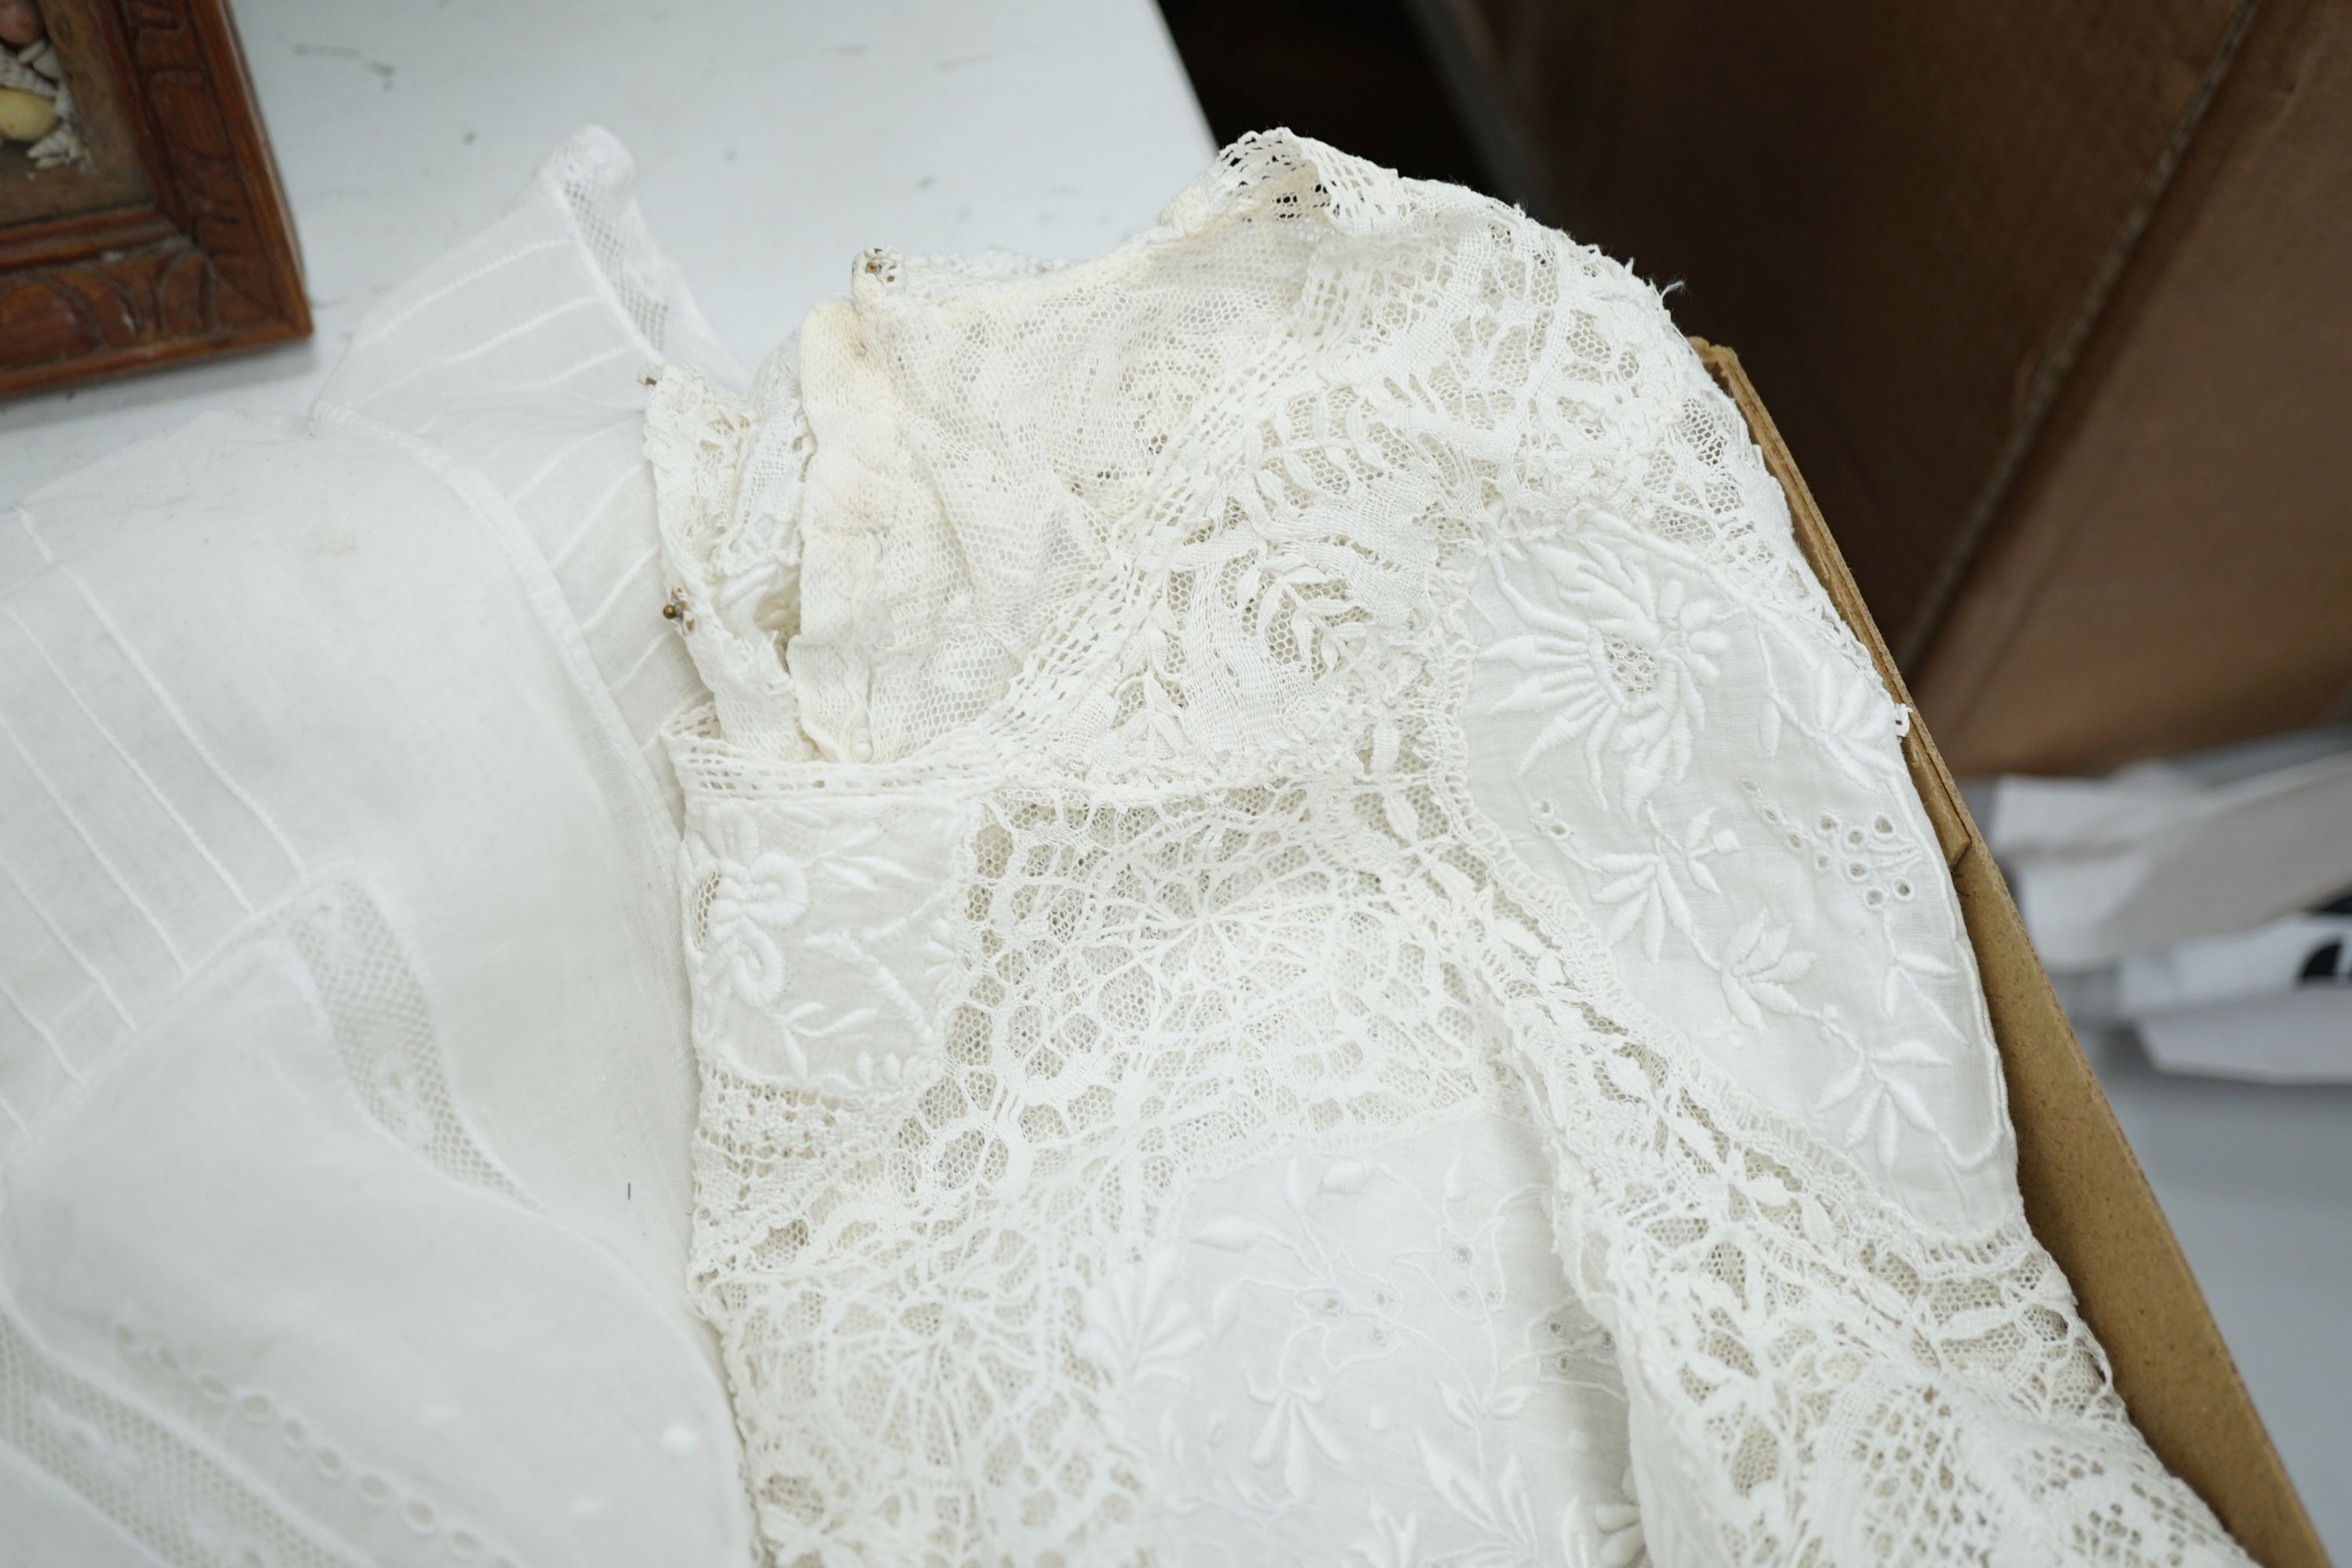 A 19th century hand made Irish crochet jacket, with long sleeves and high collar, a bobbin lace and white worked patch worked blouse, a fine lawn and anglaise worked blouse and a fine bobbin lace trimmed and white worked